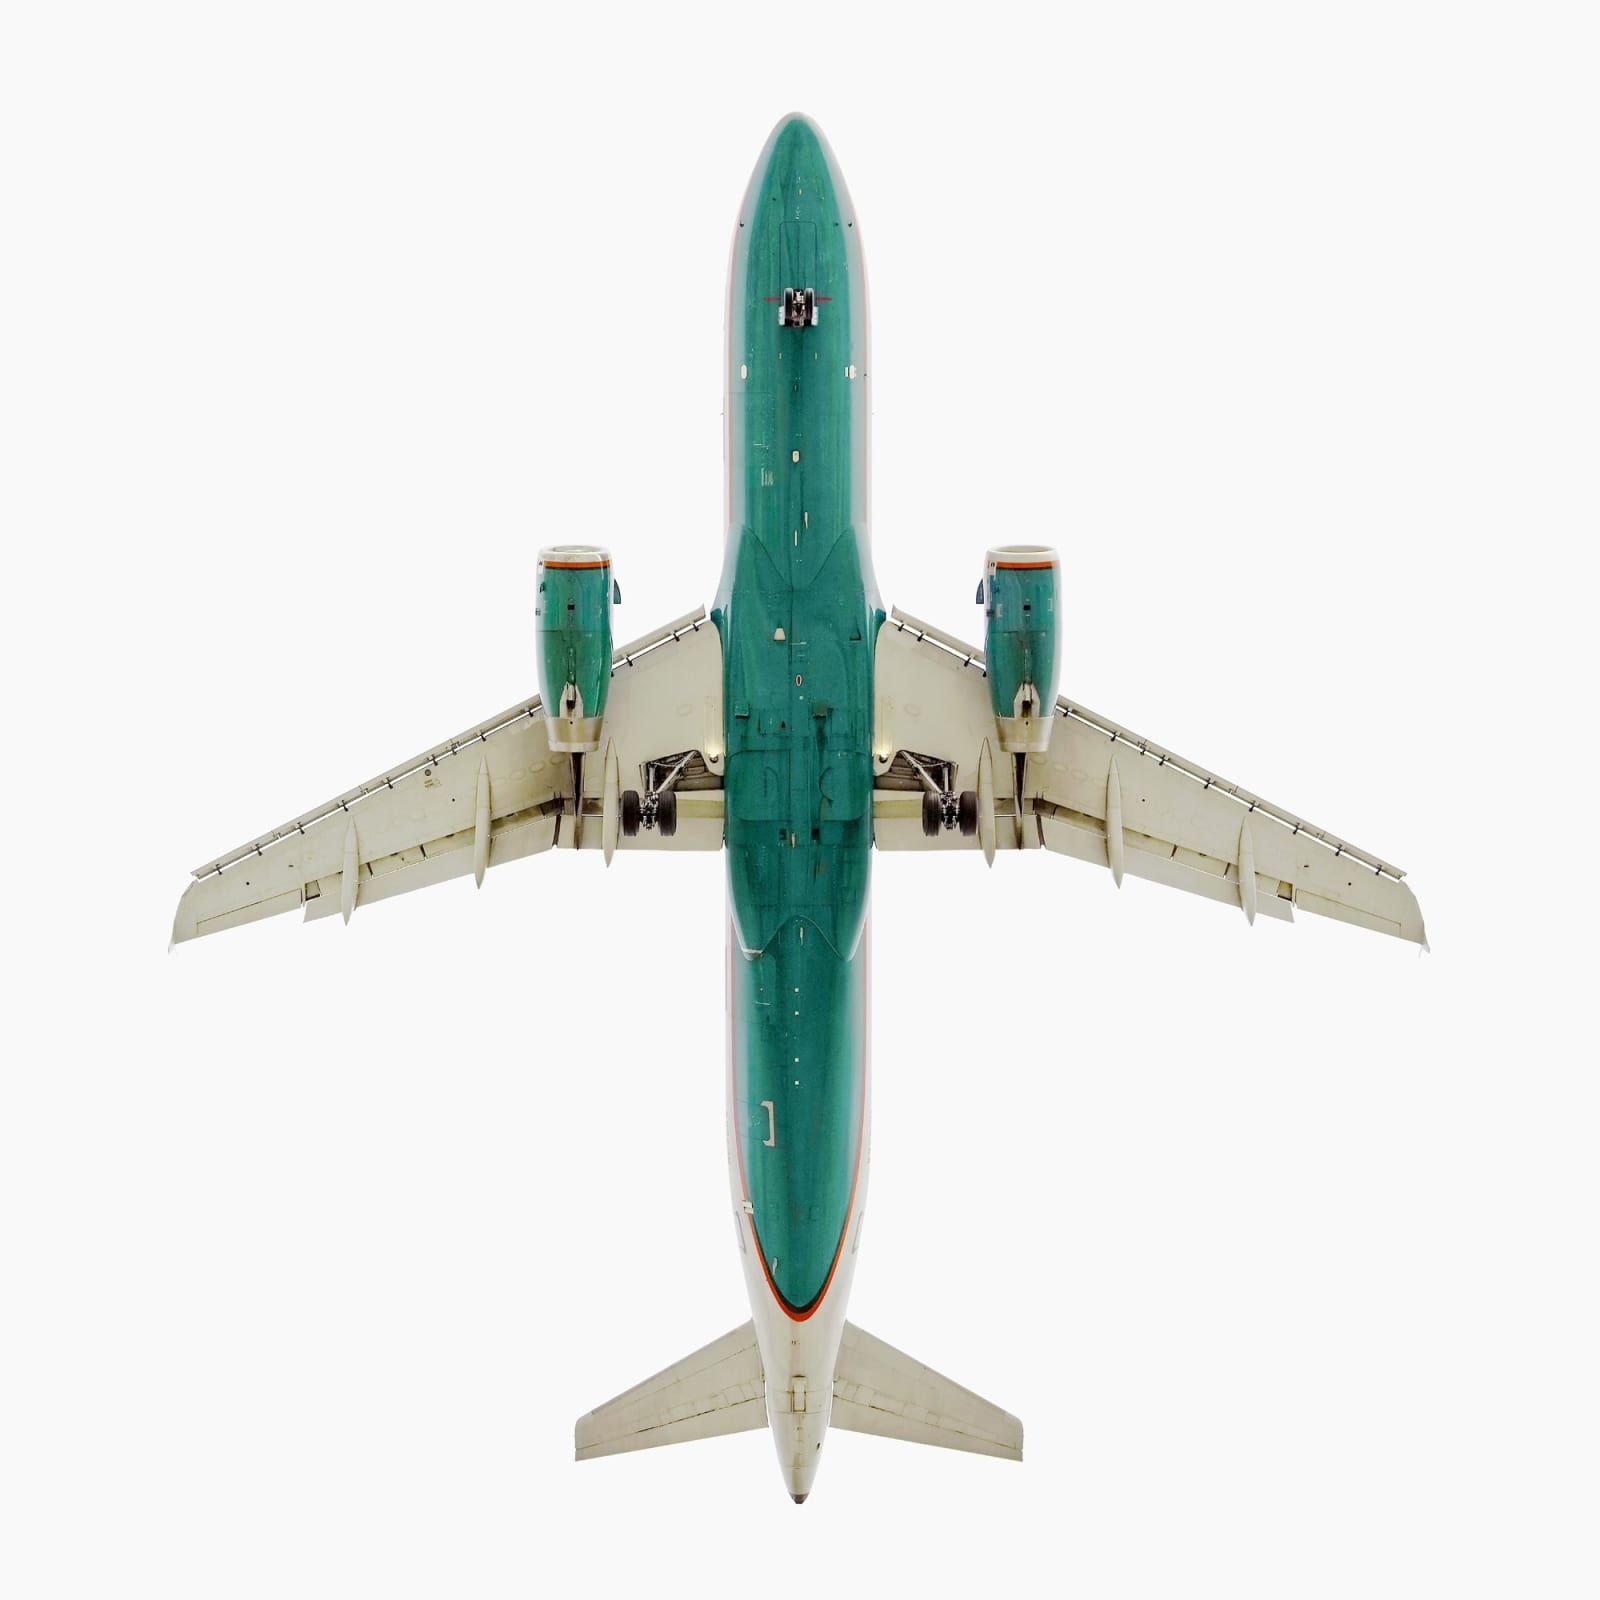 Jeffrey Milstein, America West Airlines Airbus A320-200 (framed), 2005